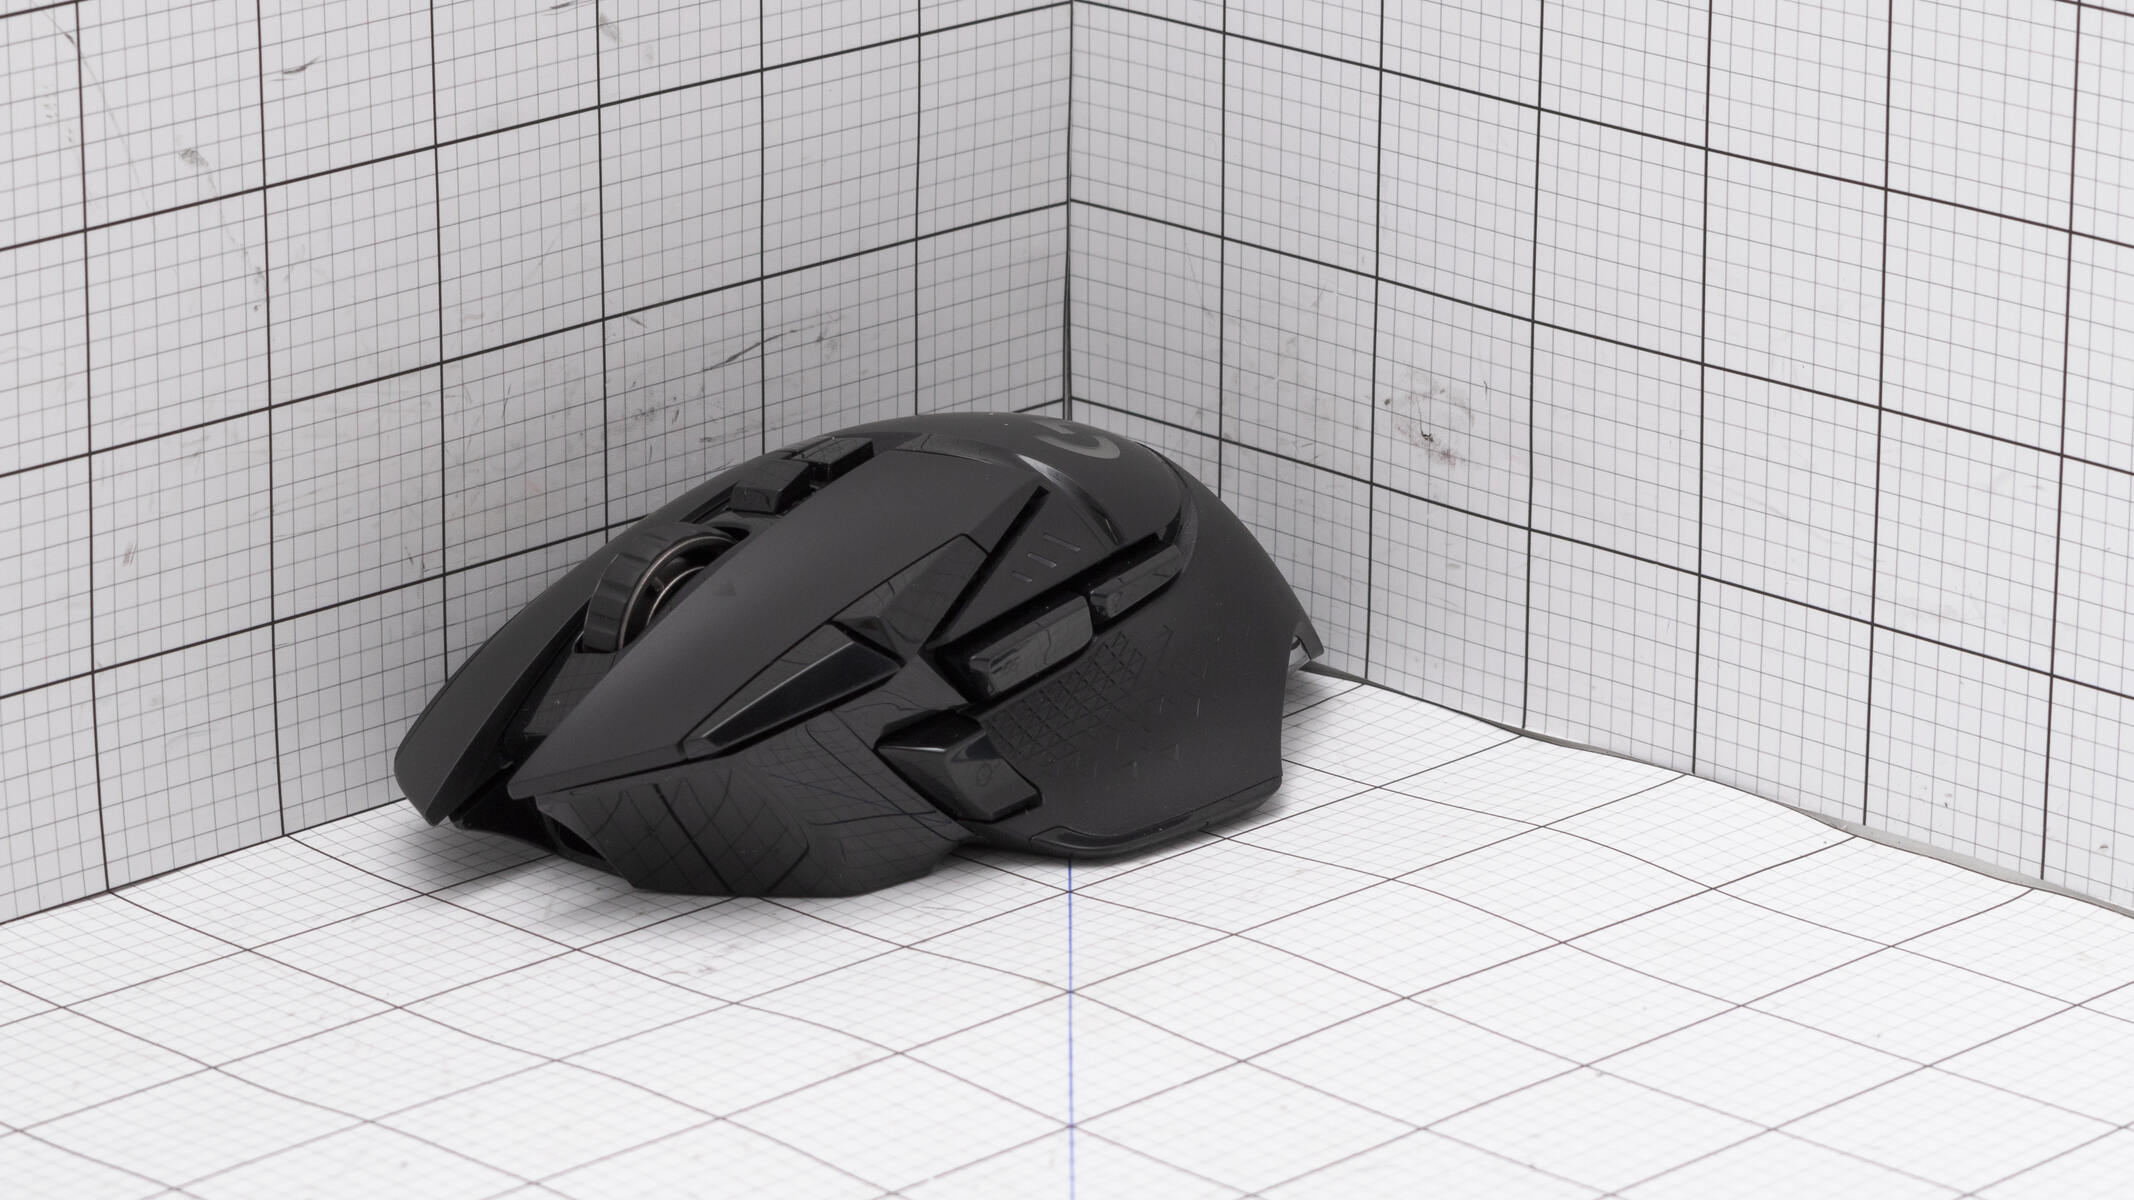 Which Is Better: G903 Or G502 Lightspeed Wireless Gaming Mouse?